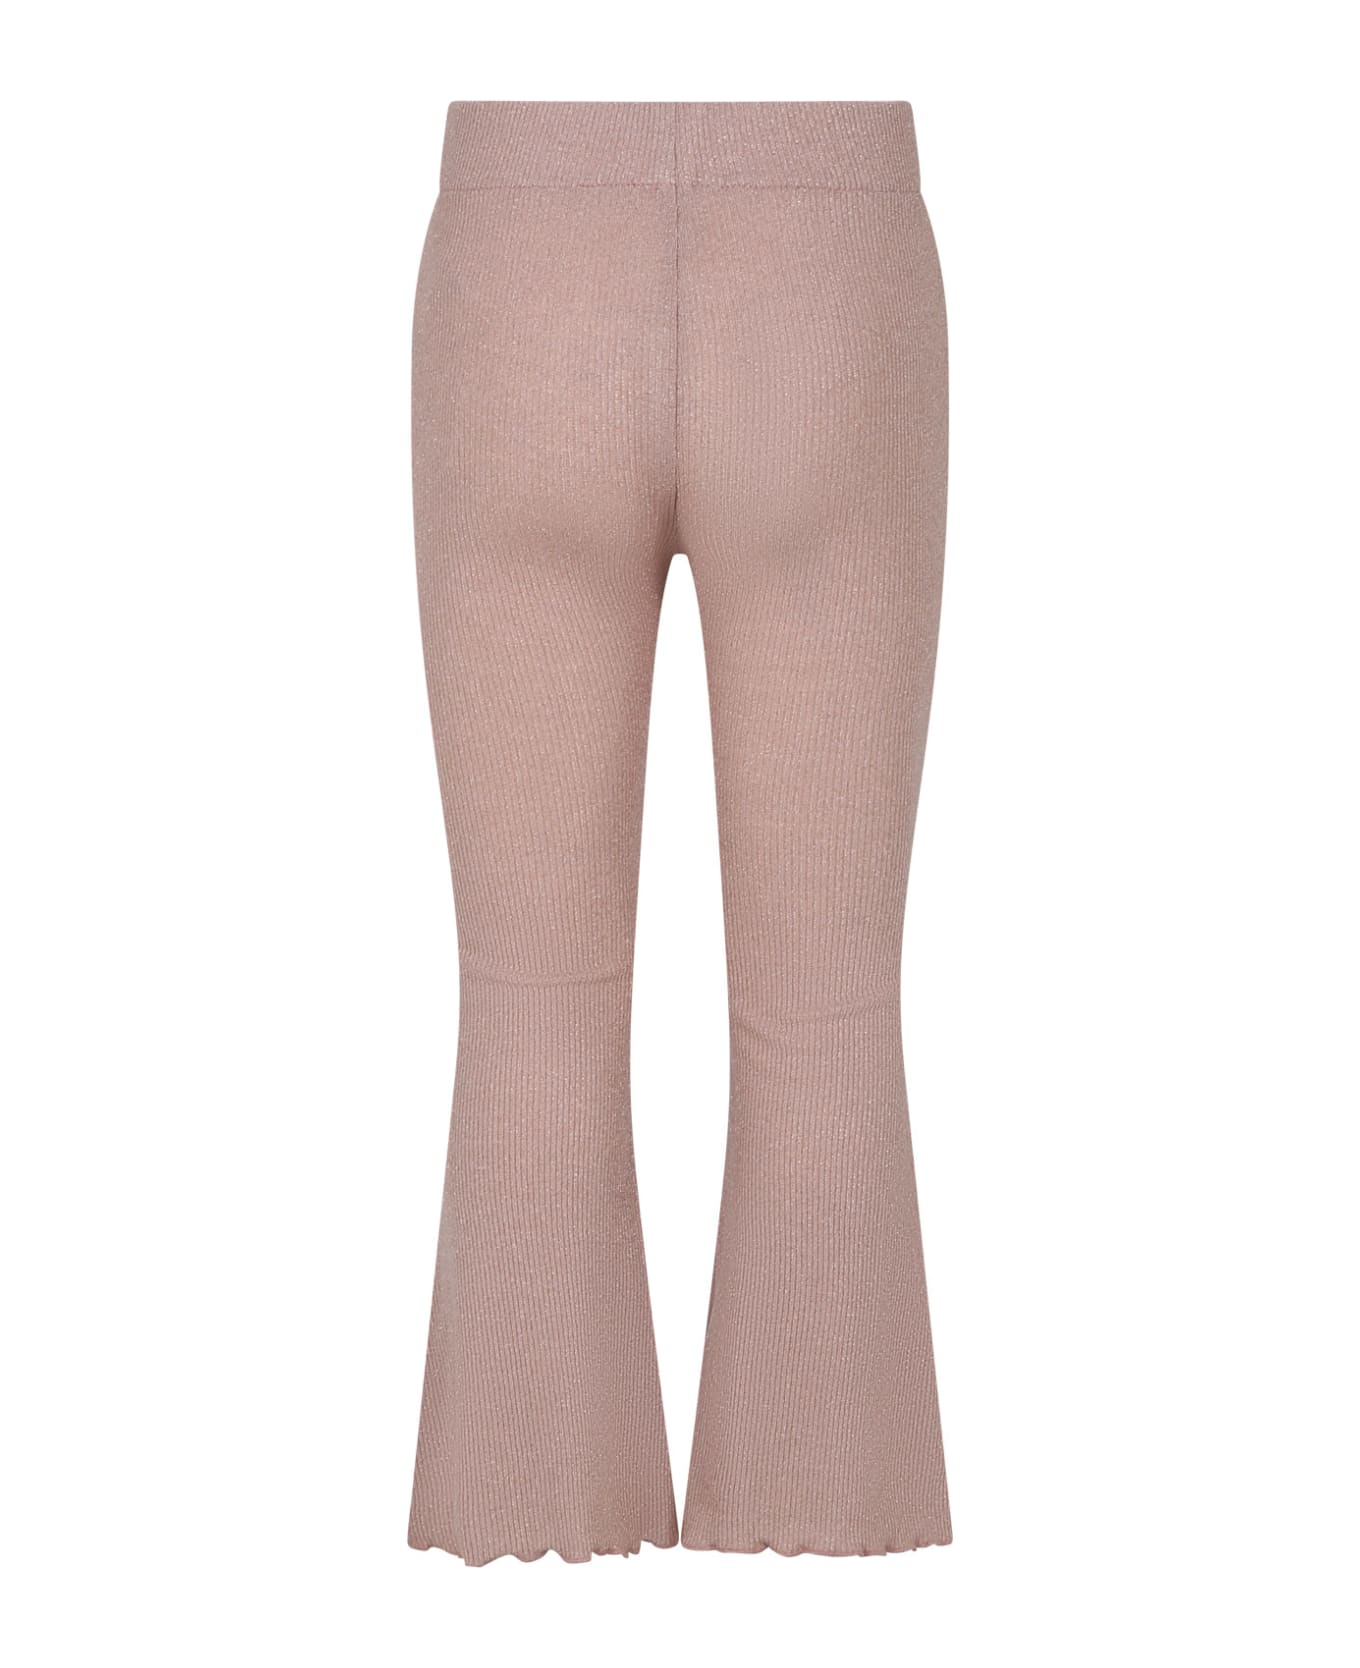 Caffe' d'Orzo Pink Trousers For Girl With Lurex - Pink